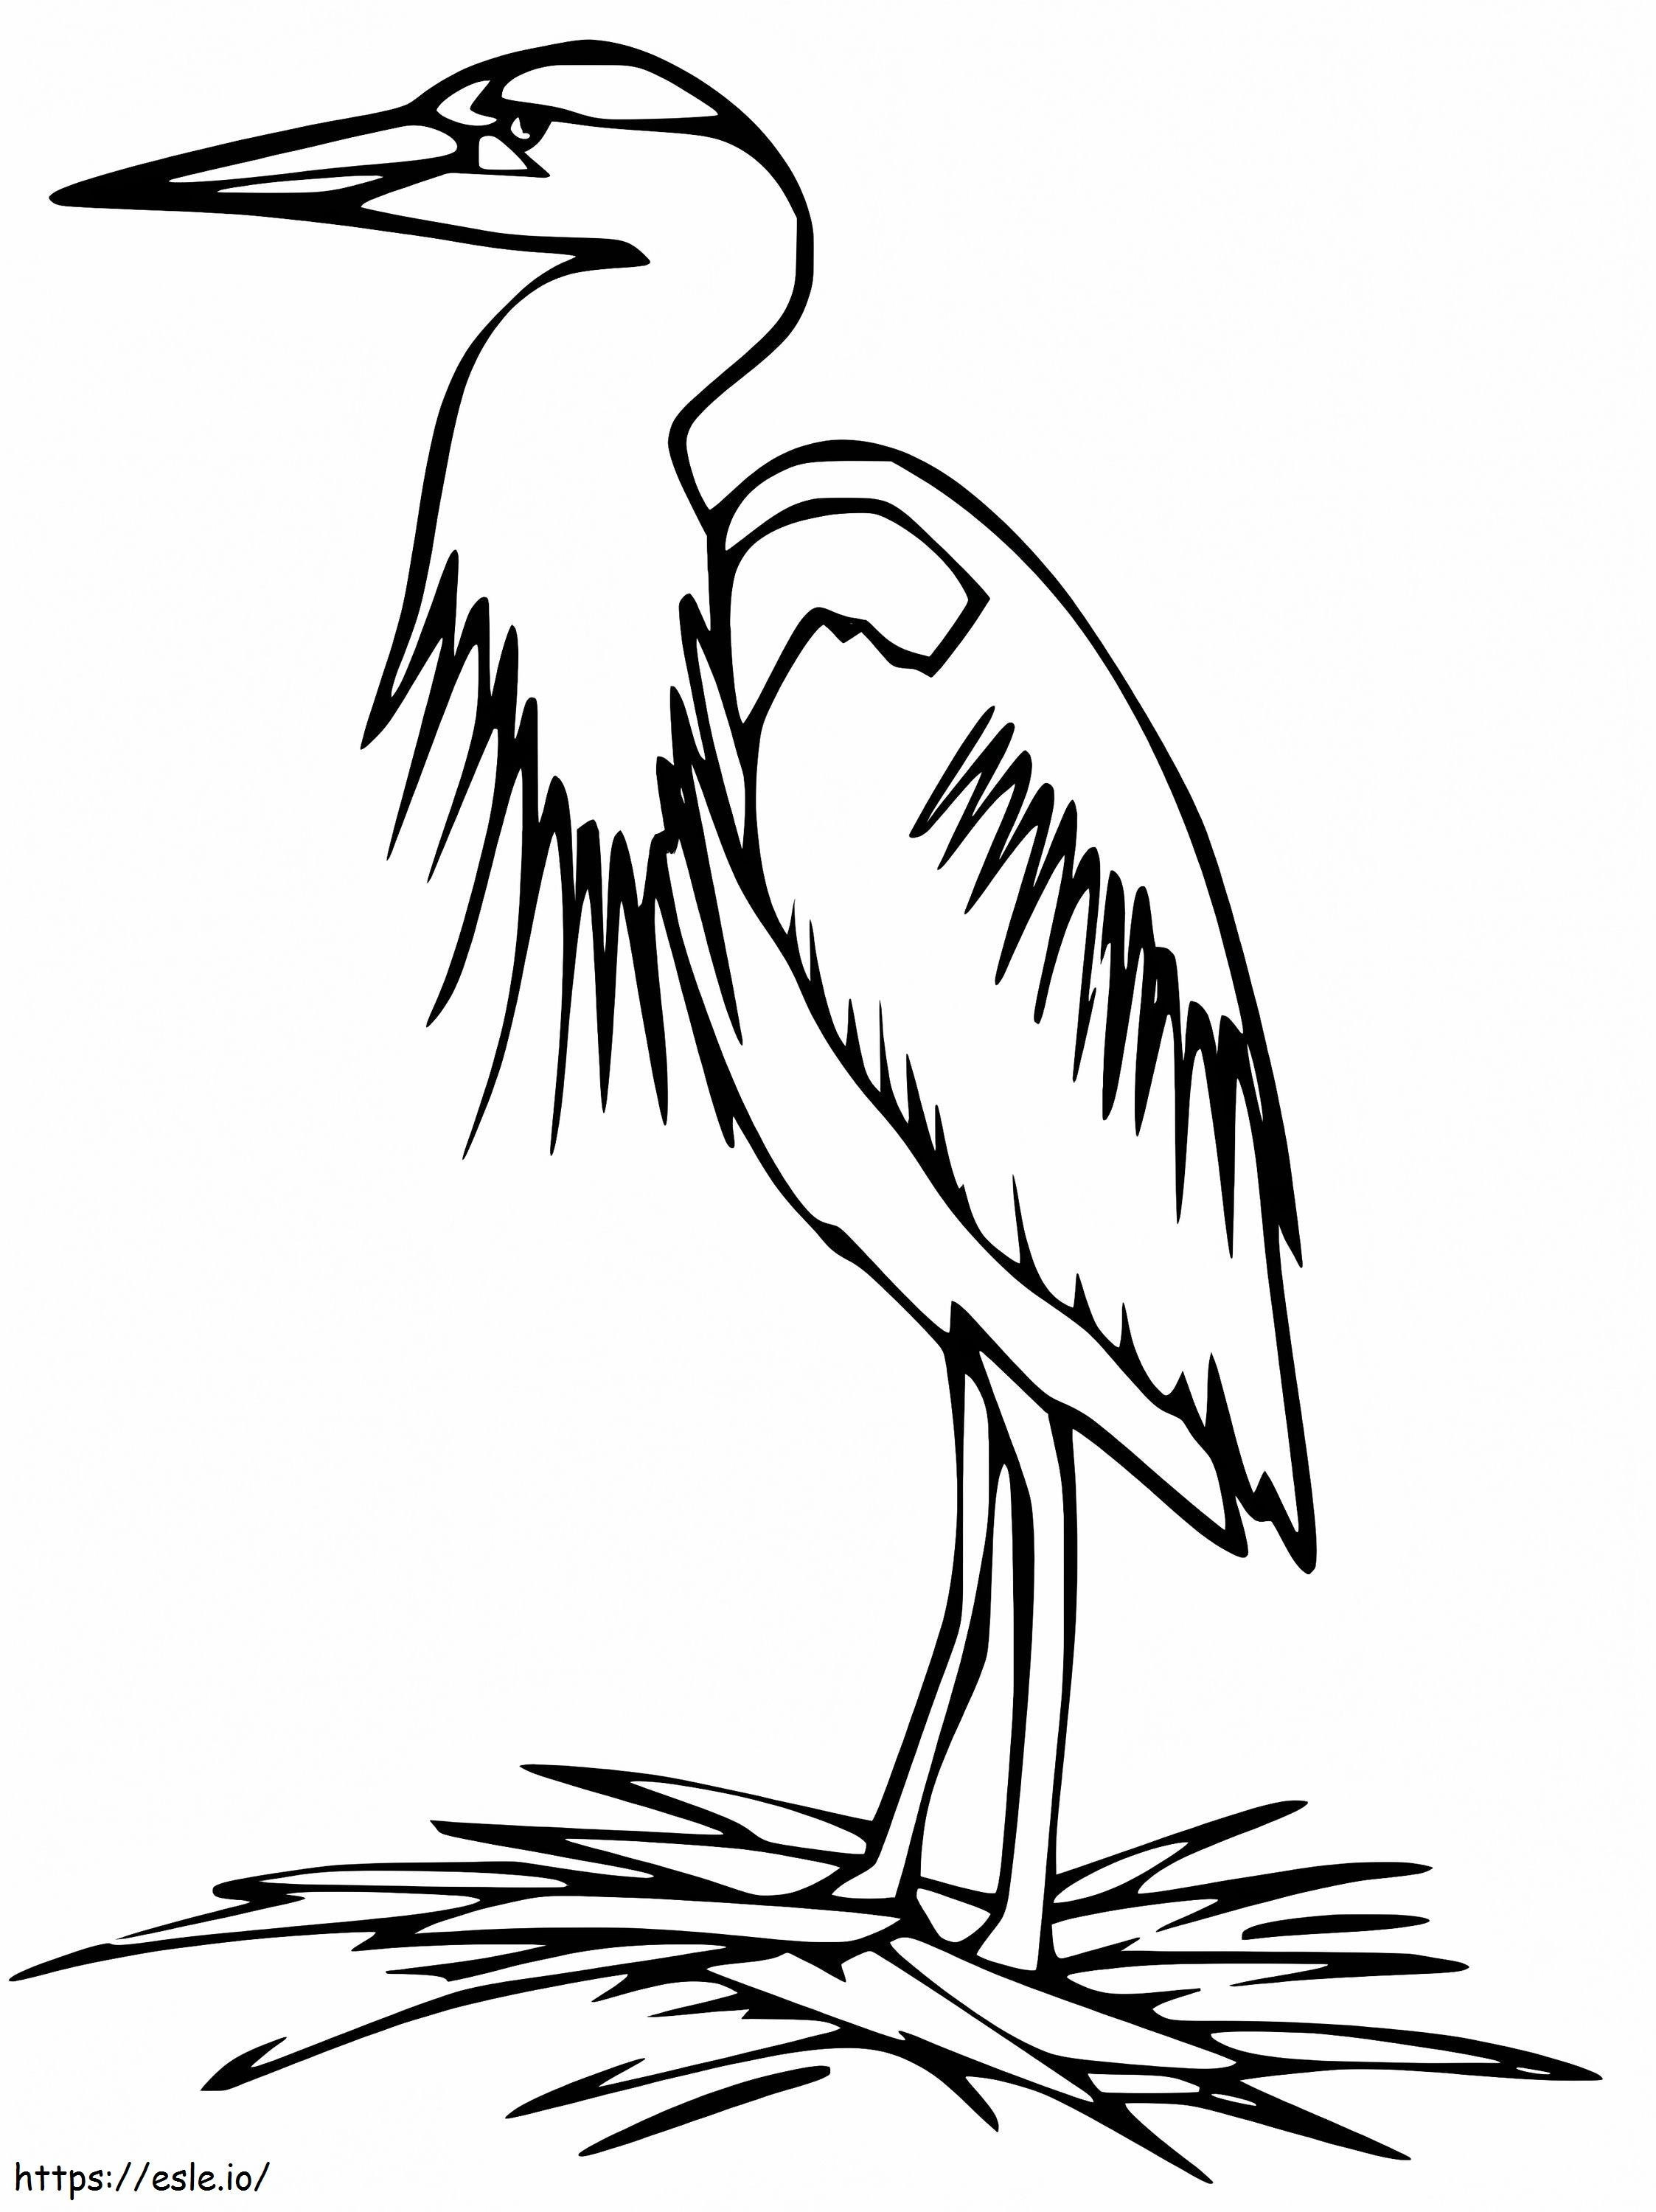 Heron Standing coloring page